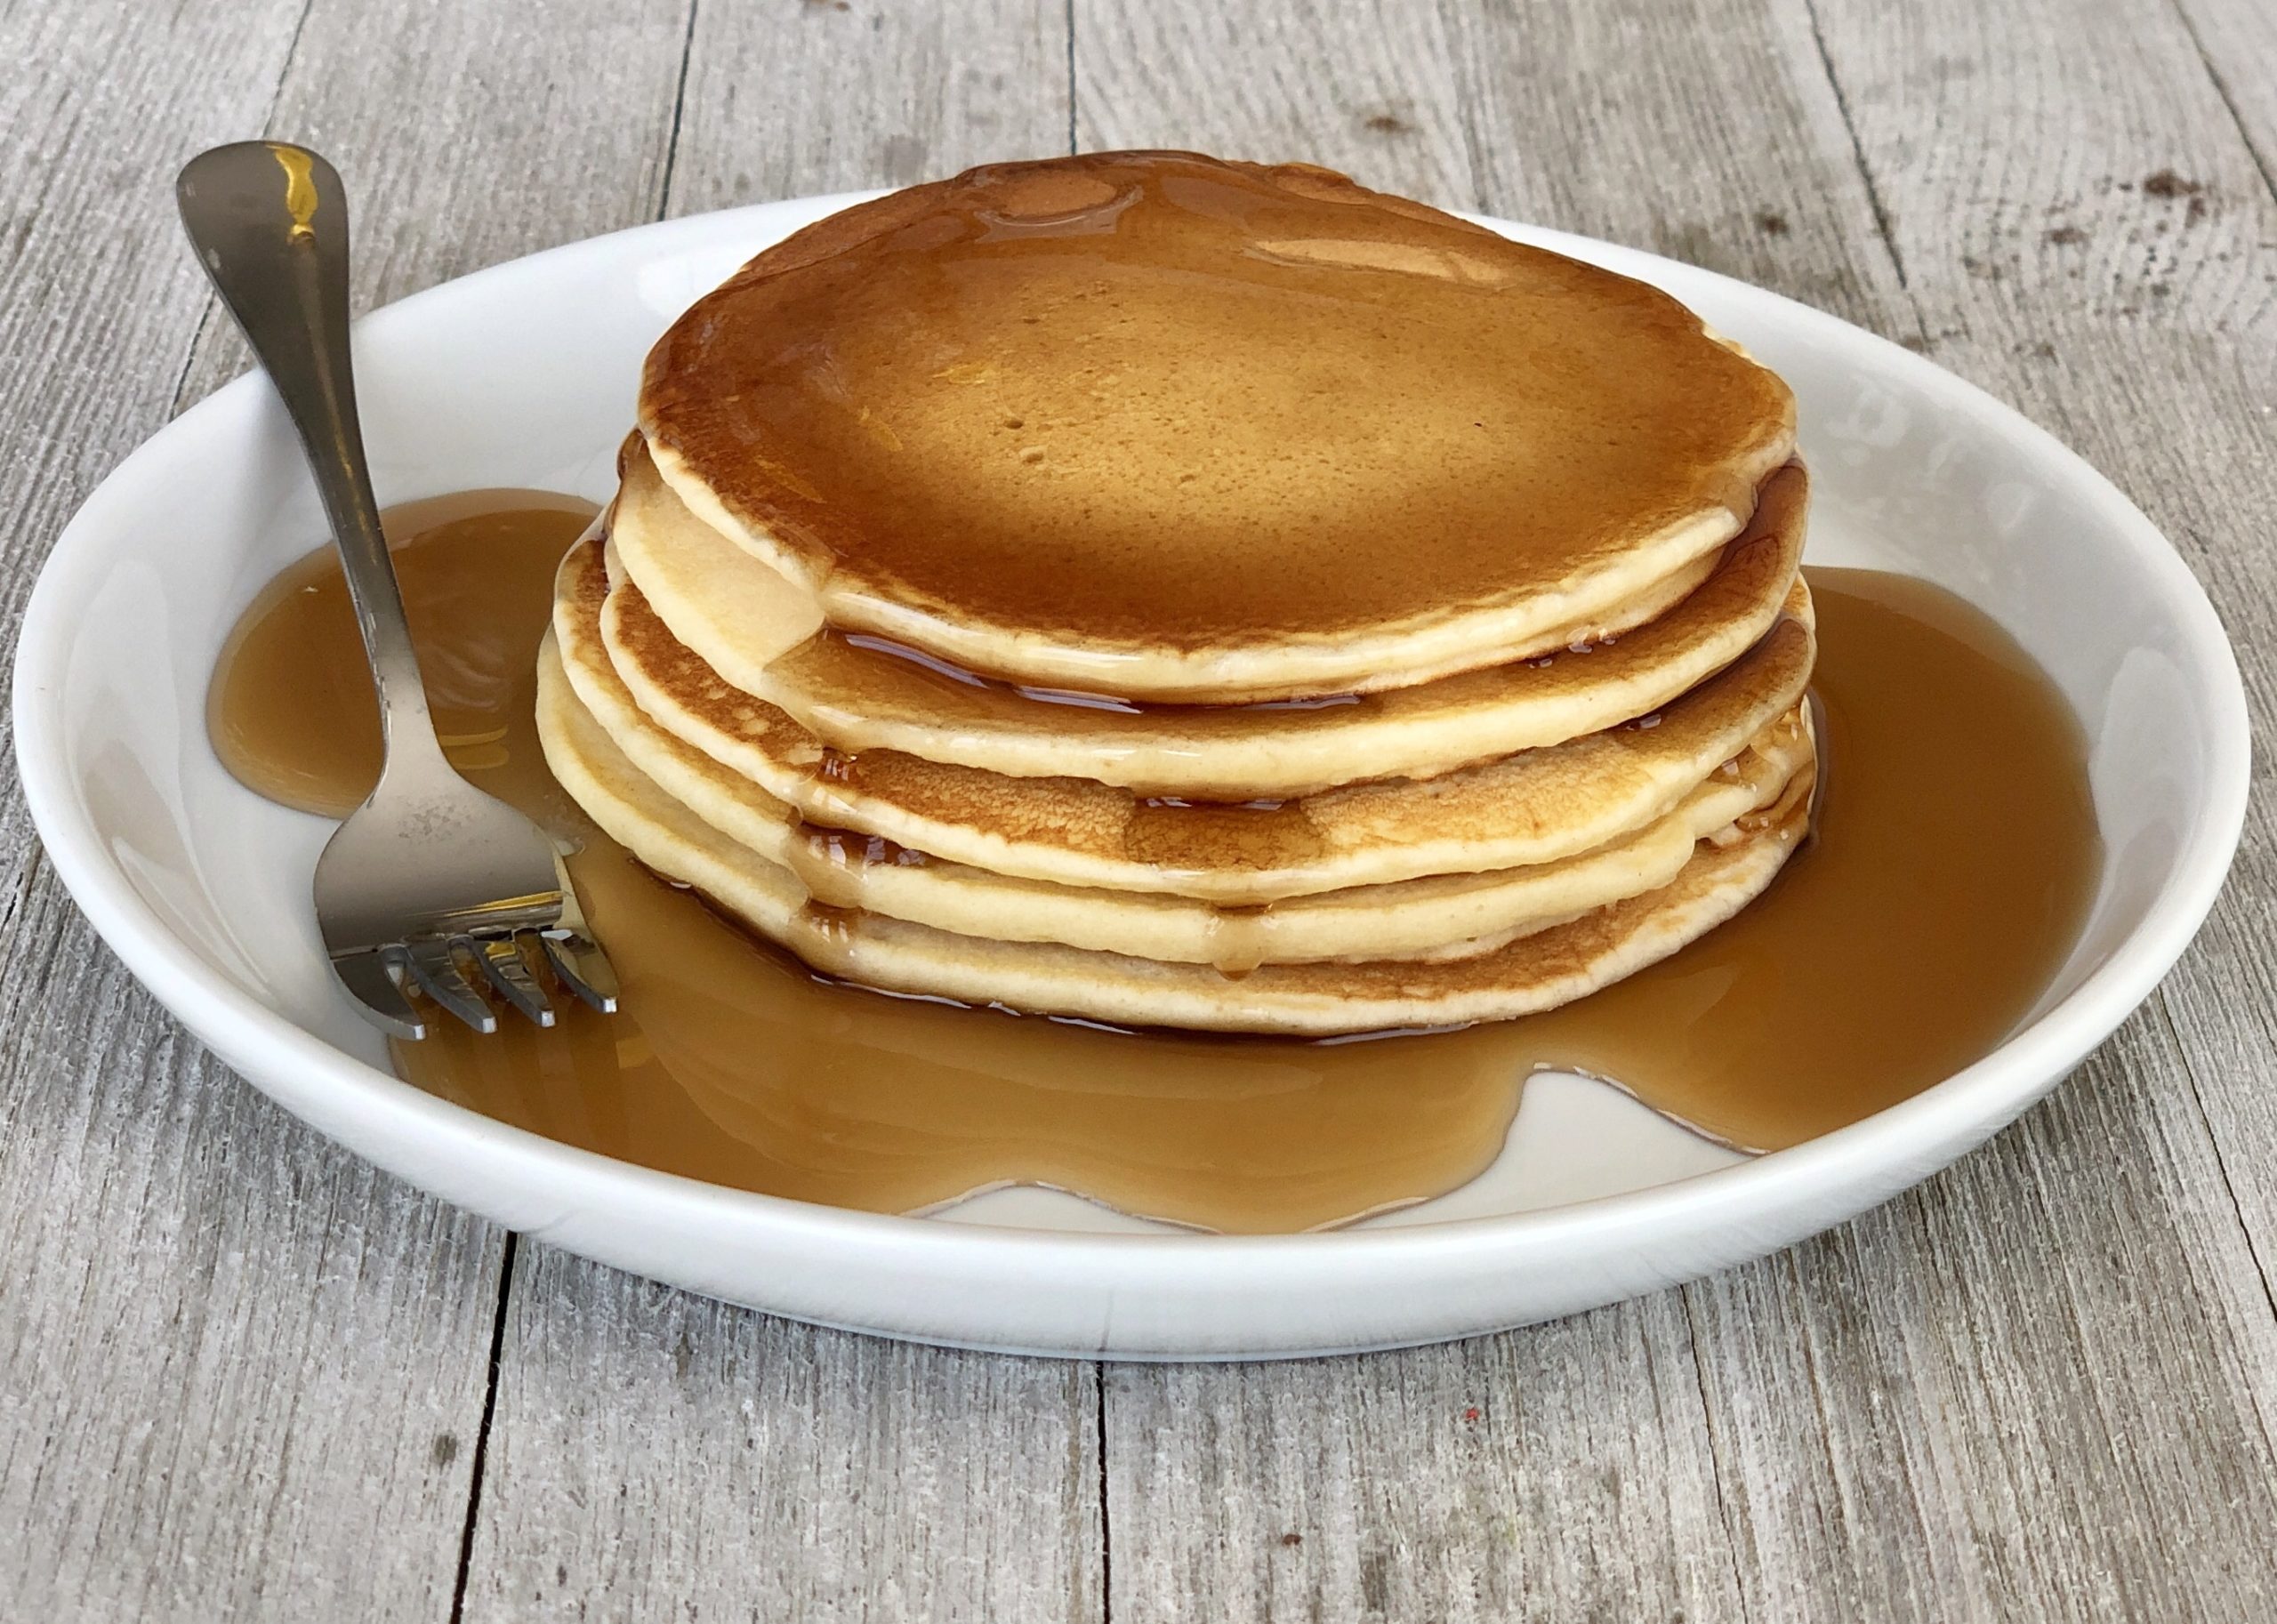 Easy and tasty homemade pancakes